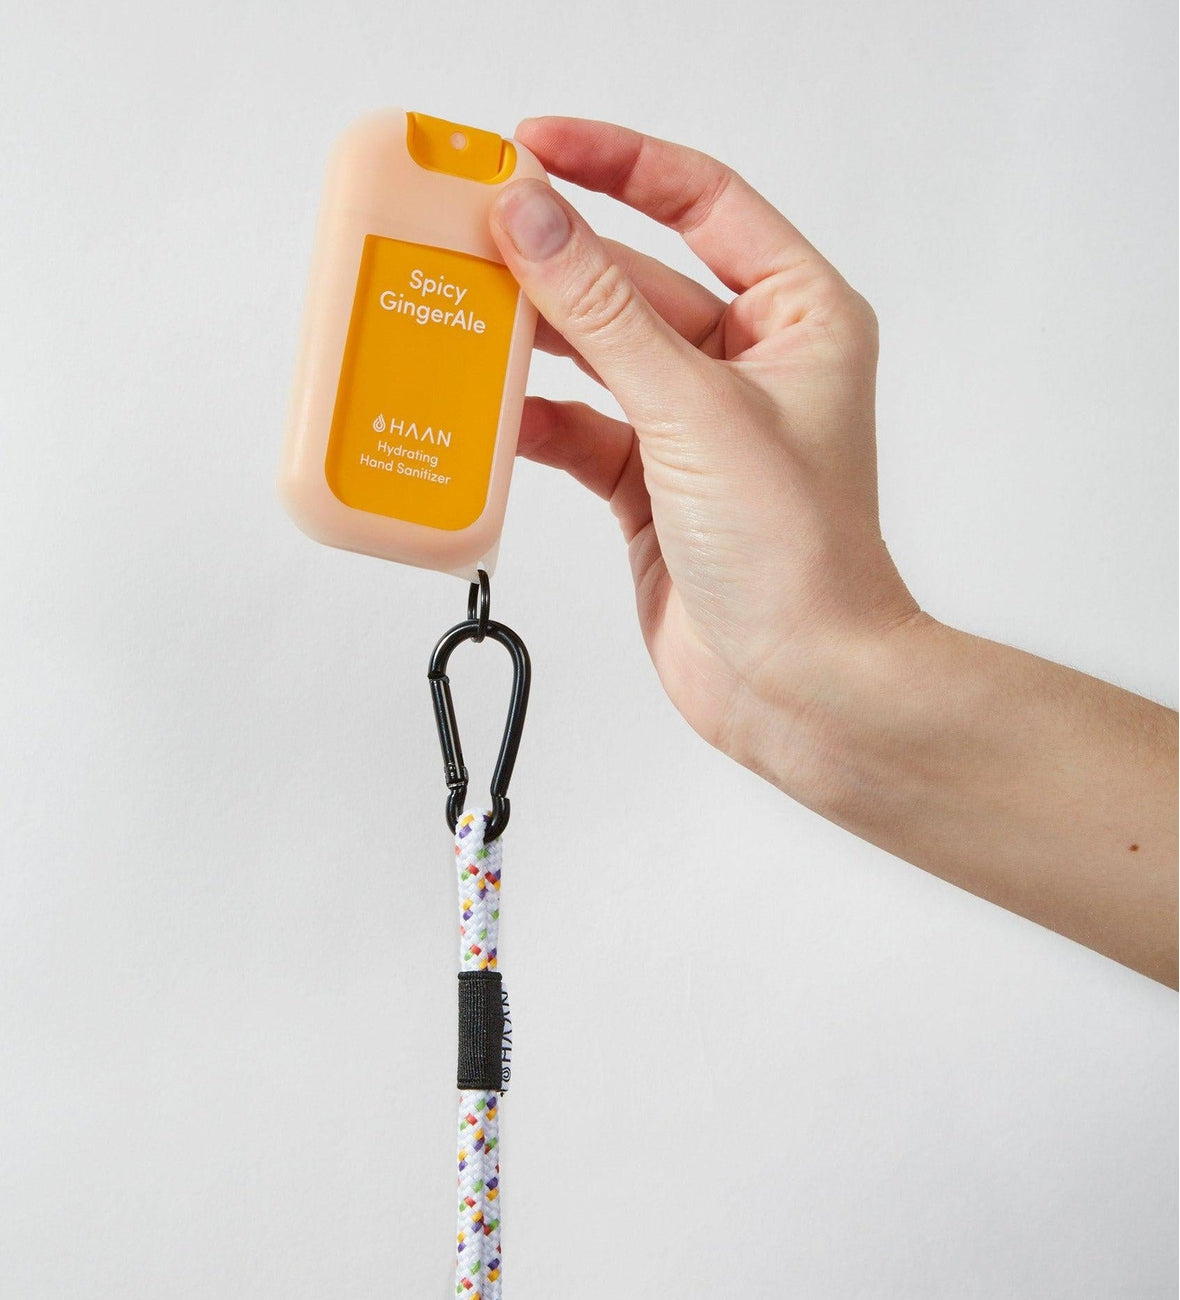 Hand Sanitizer & Lanyard Pack - Spicy Ginger Ale